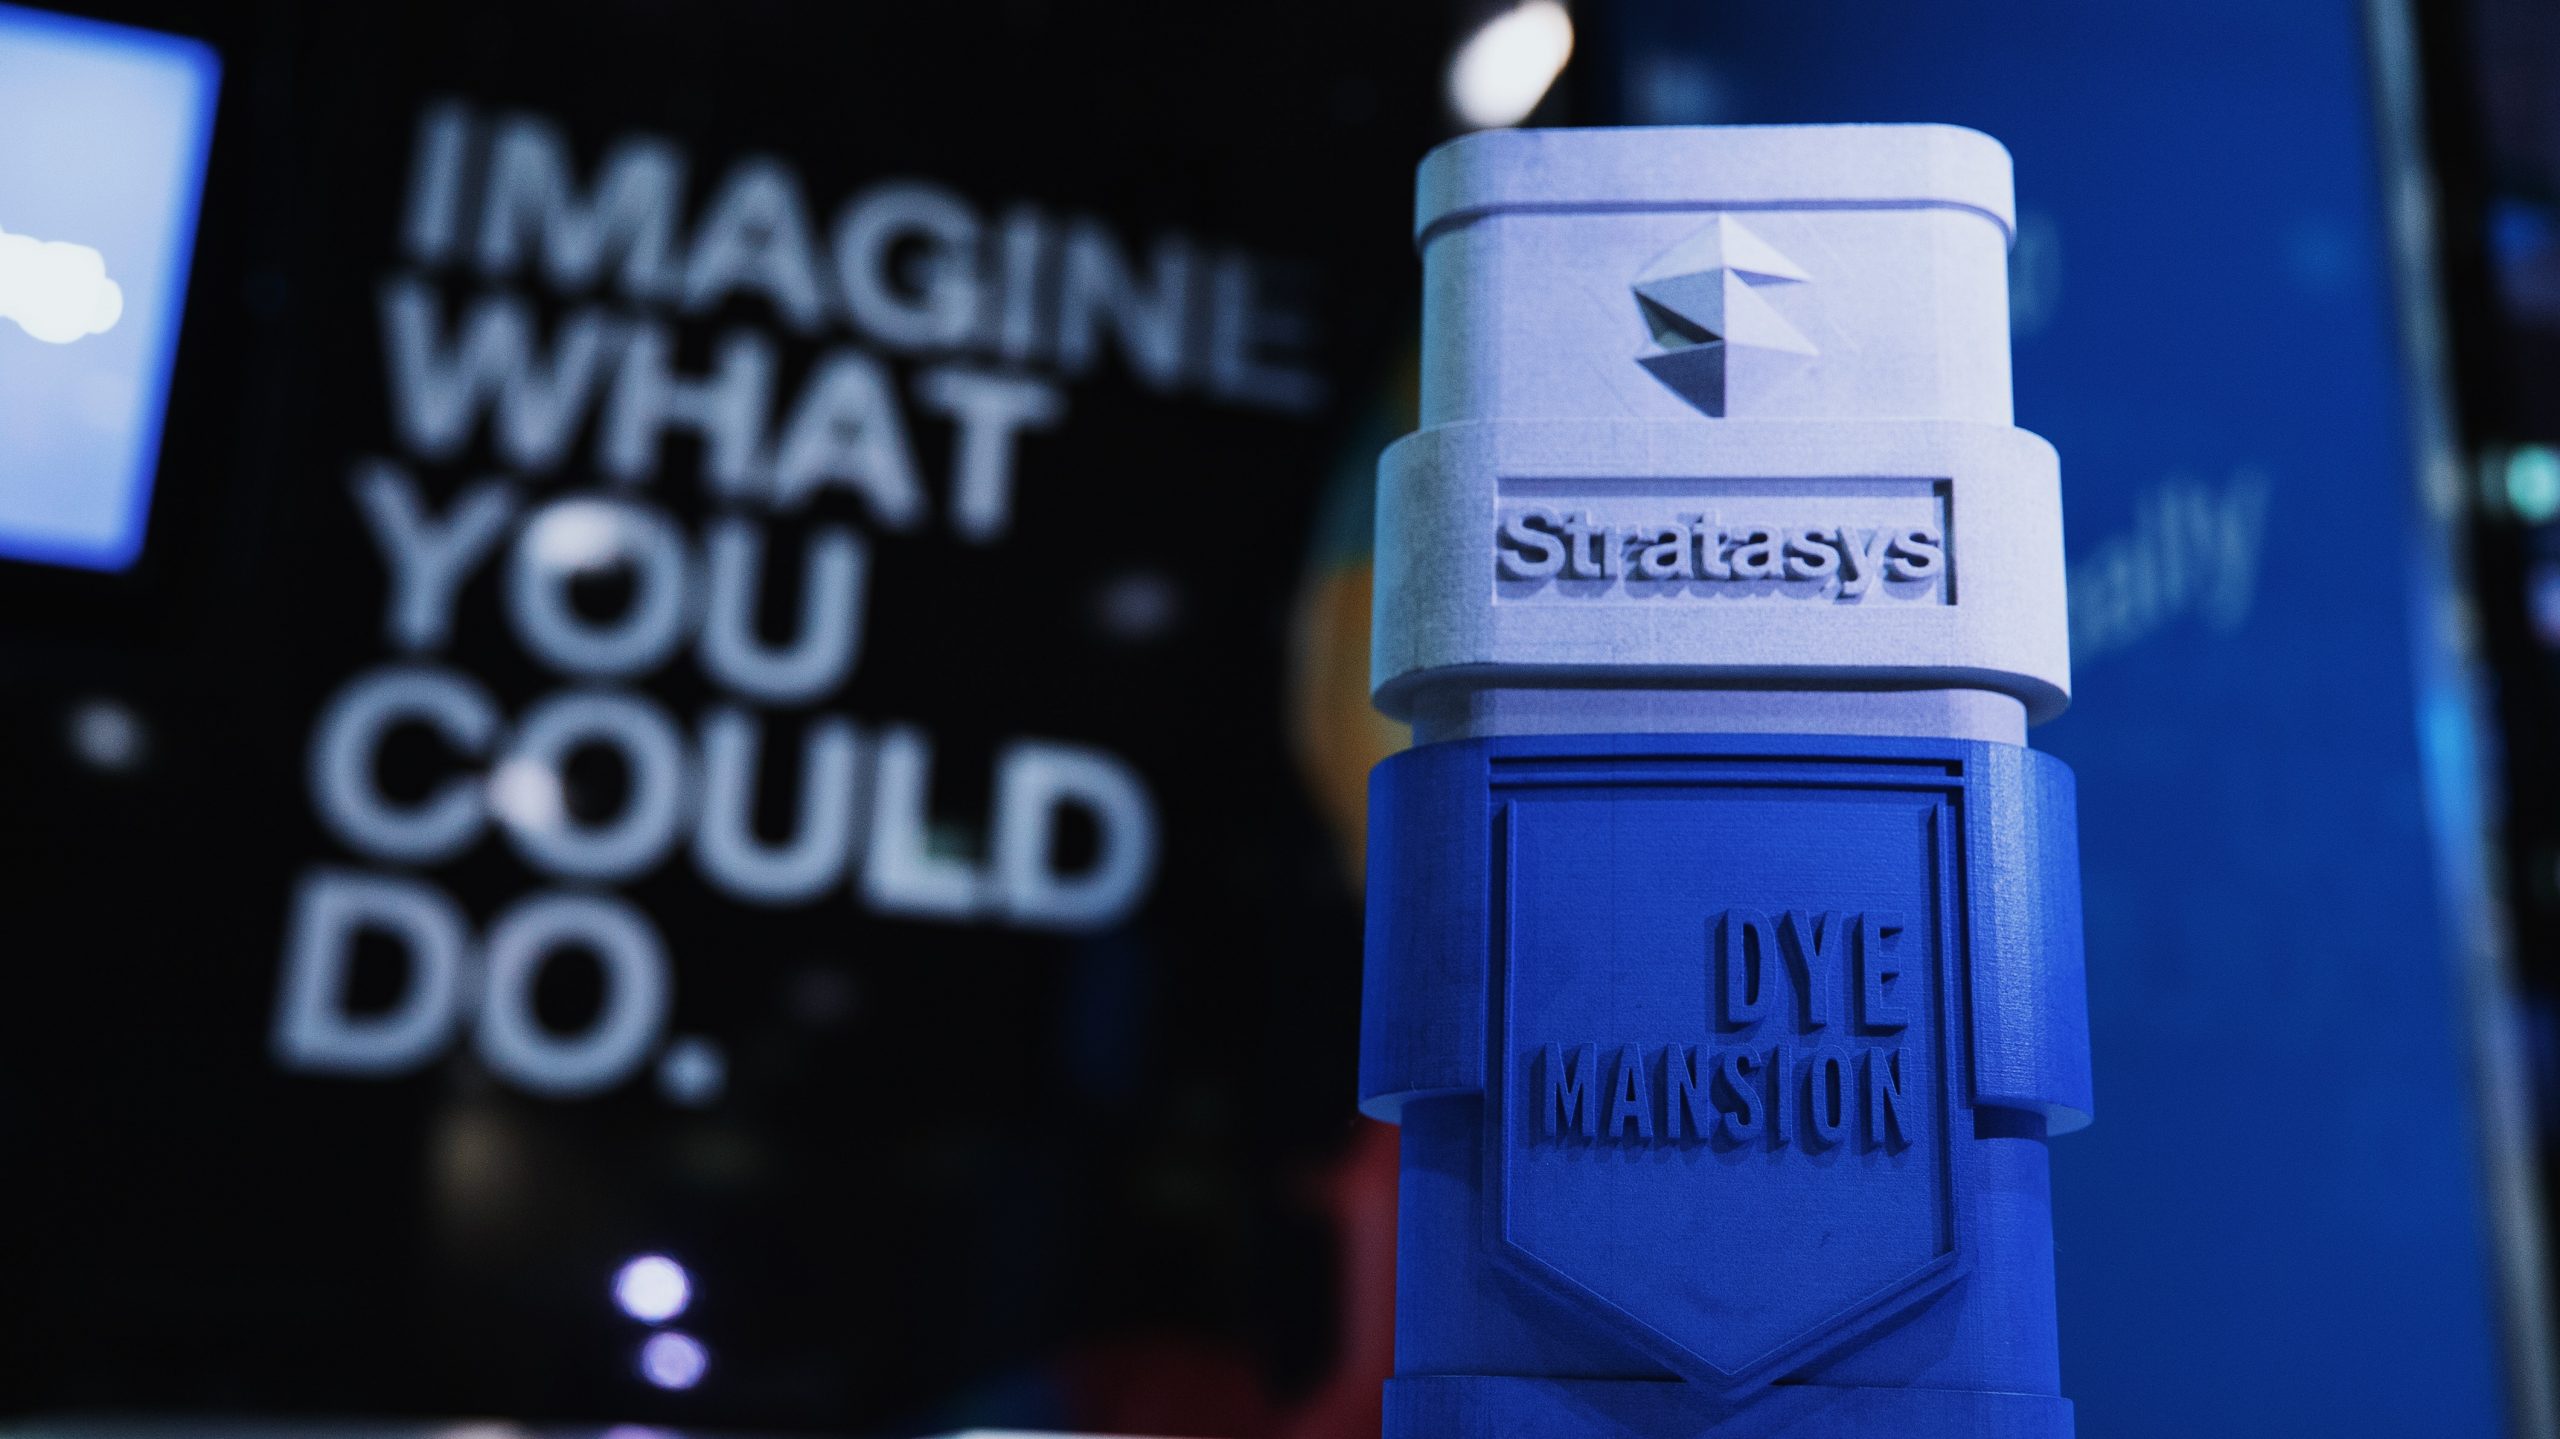 DyeMansion and Stratasys are continuing to expand their strategic alliance. Photo via DyeMansion.